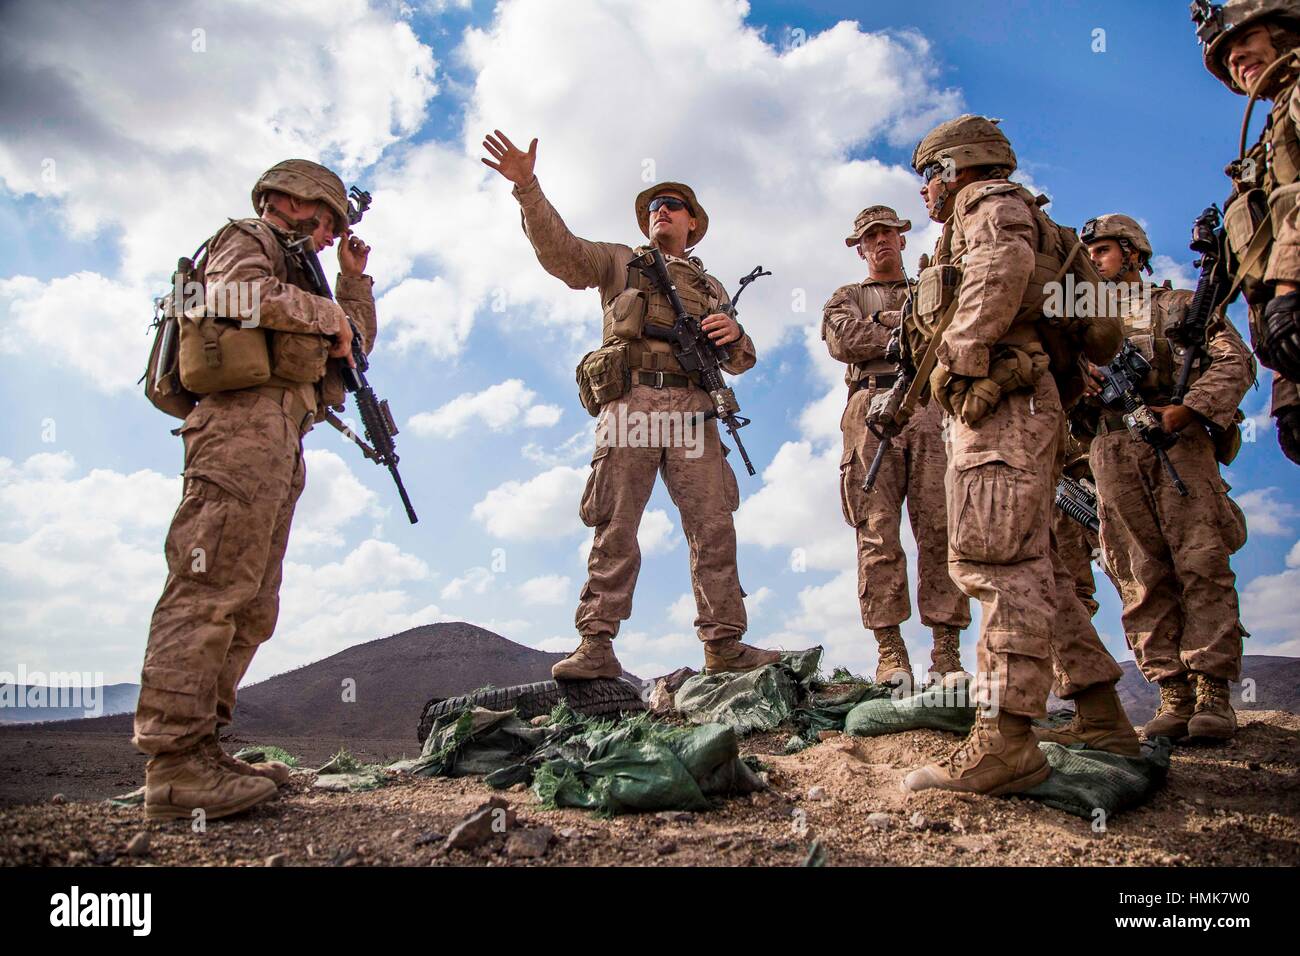 DJIBOUTI (Dec. 13, 2016) U.S. Marine 1st Lt. William Doughtery, an infantry officer with Company B, Battalion Landing Team 1st Bn., 4th Marines , Stock Photo